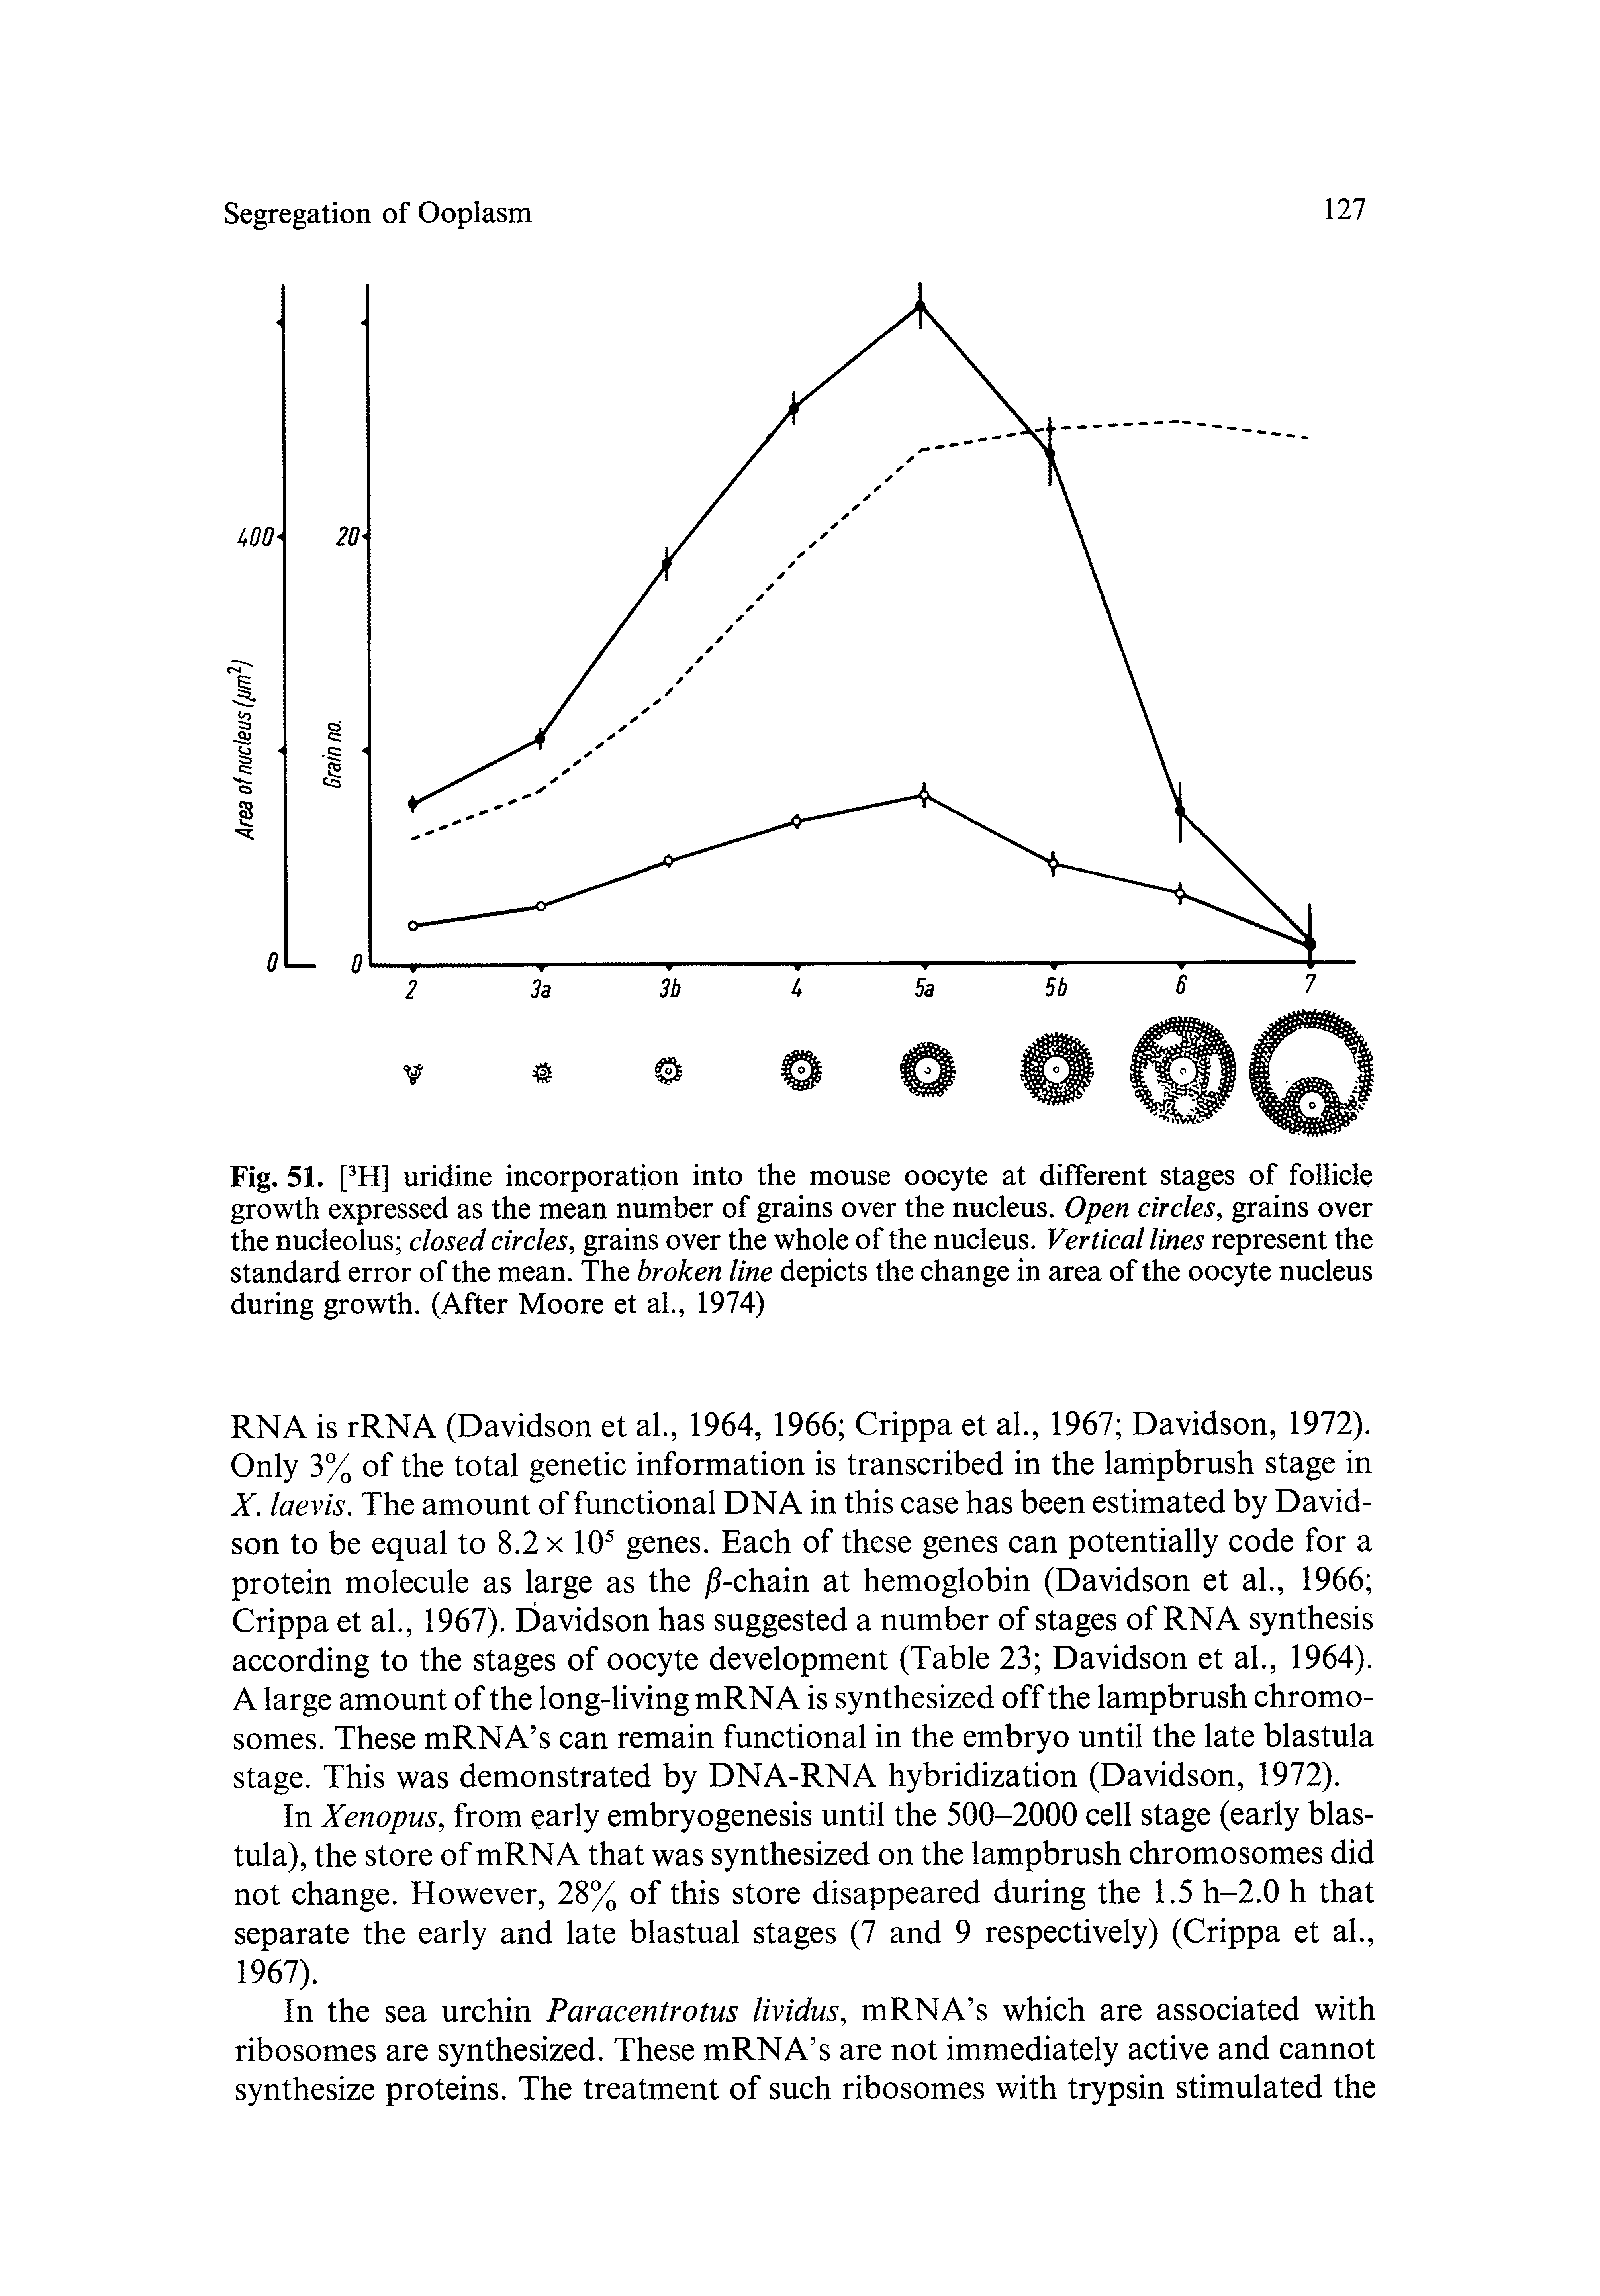 Fig. 51. [ H] uridine incorporation into the mouse oocyte at different stages of follicle growth expressed as the mean number of grains over the nucleus. Open circles, grains over the nucleolus closed circles, grains over the whole of the nucleus. Vertical lines represent the standard error of the mean. The broken line depicts the change in area of the oocyte nucleus during growth. (After Moore et al., 1974)...